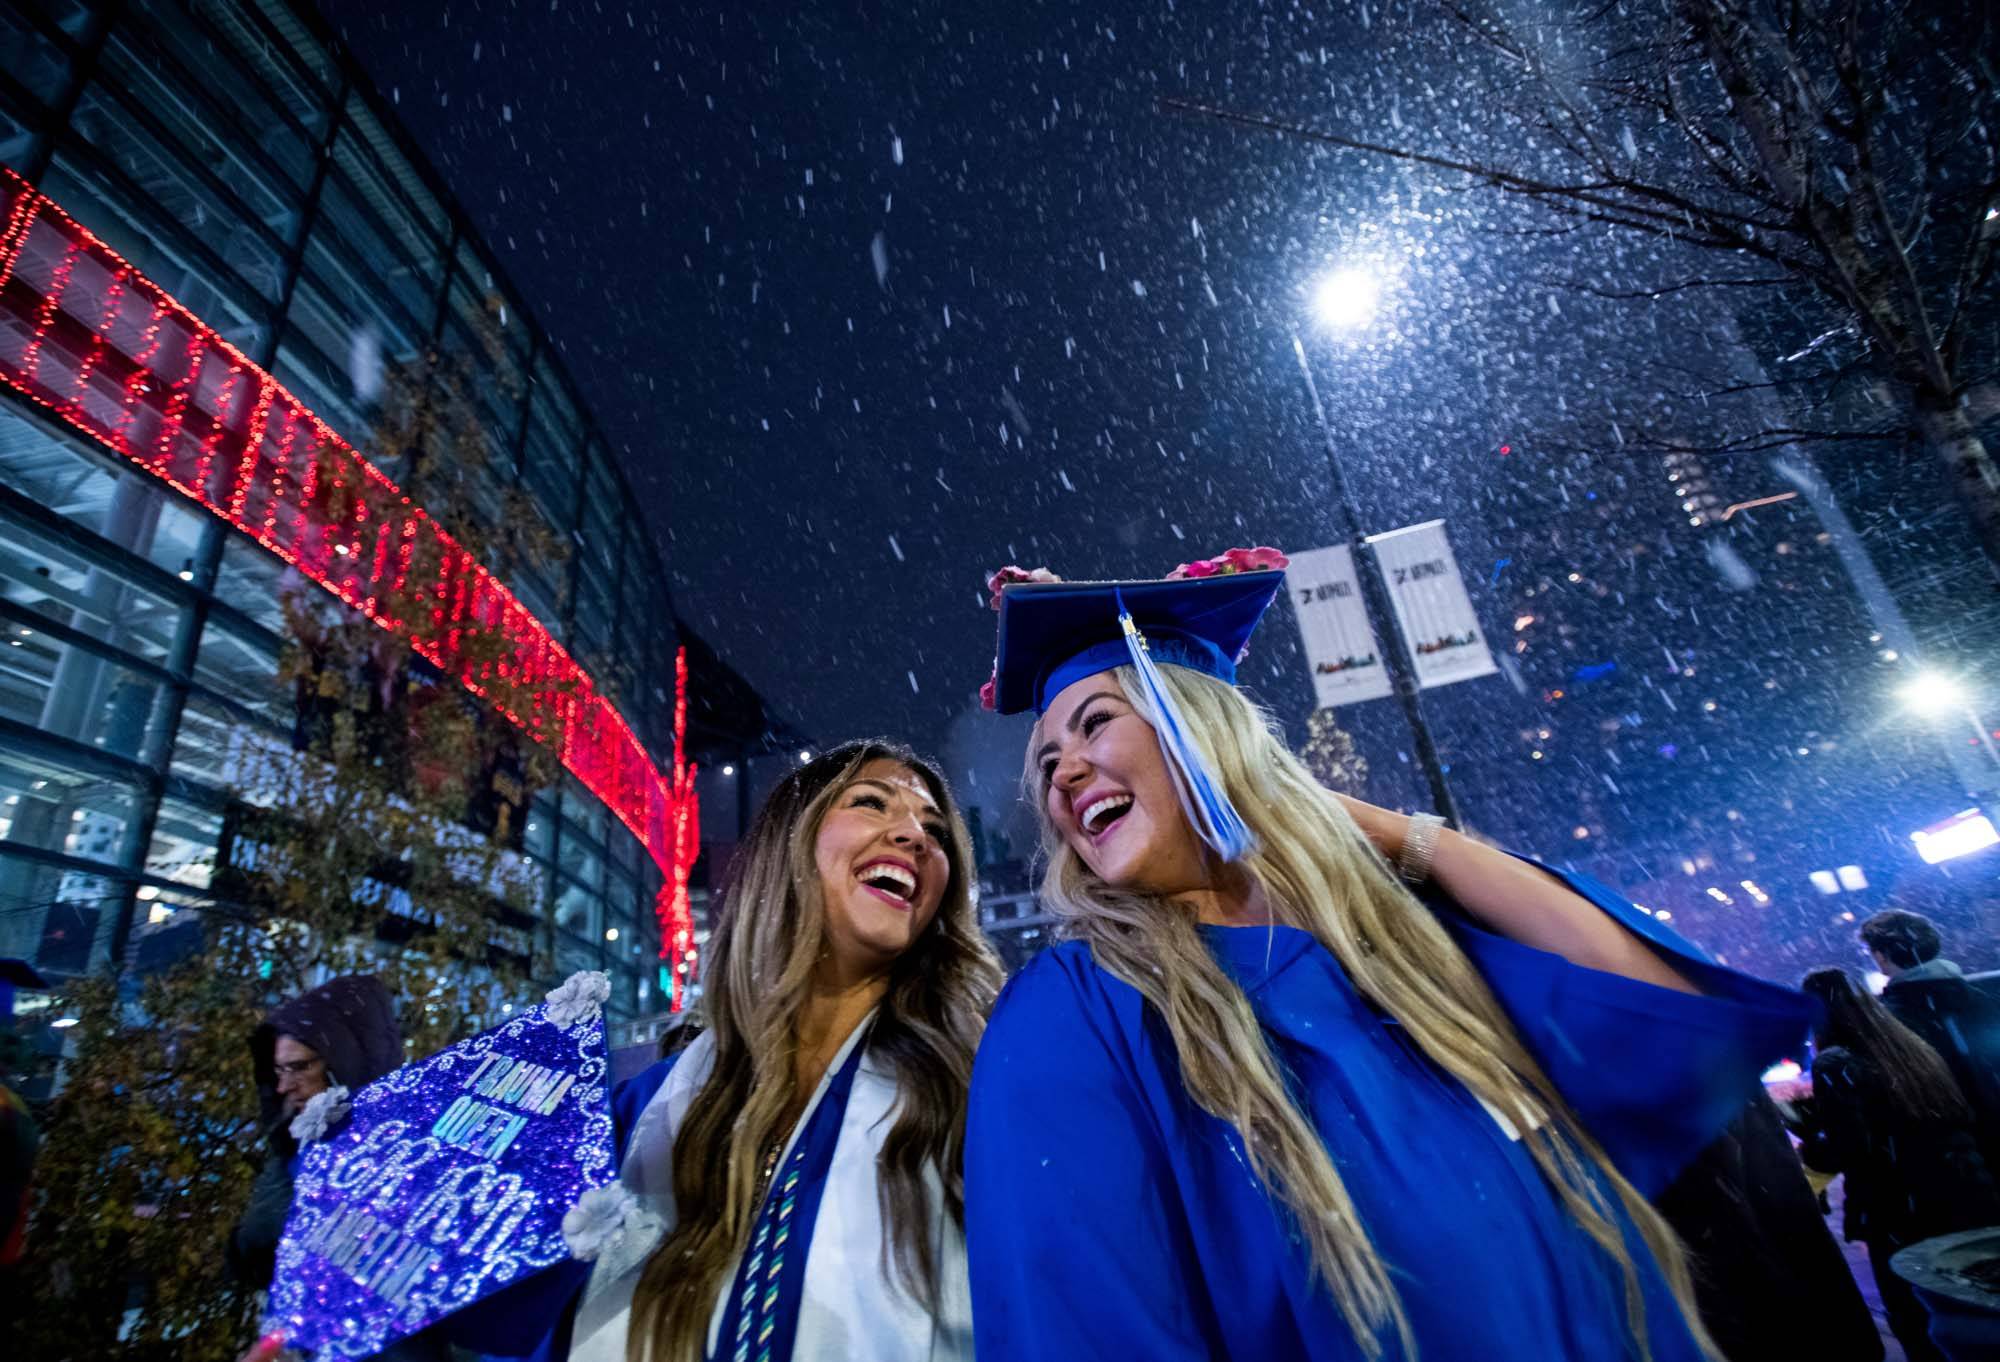 Two grads laugh together after Commencement in the snow